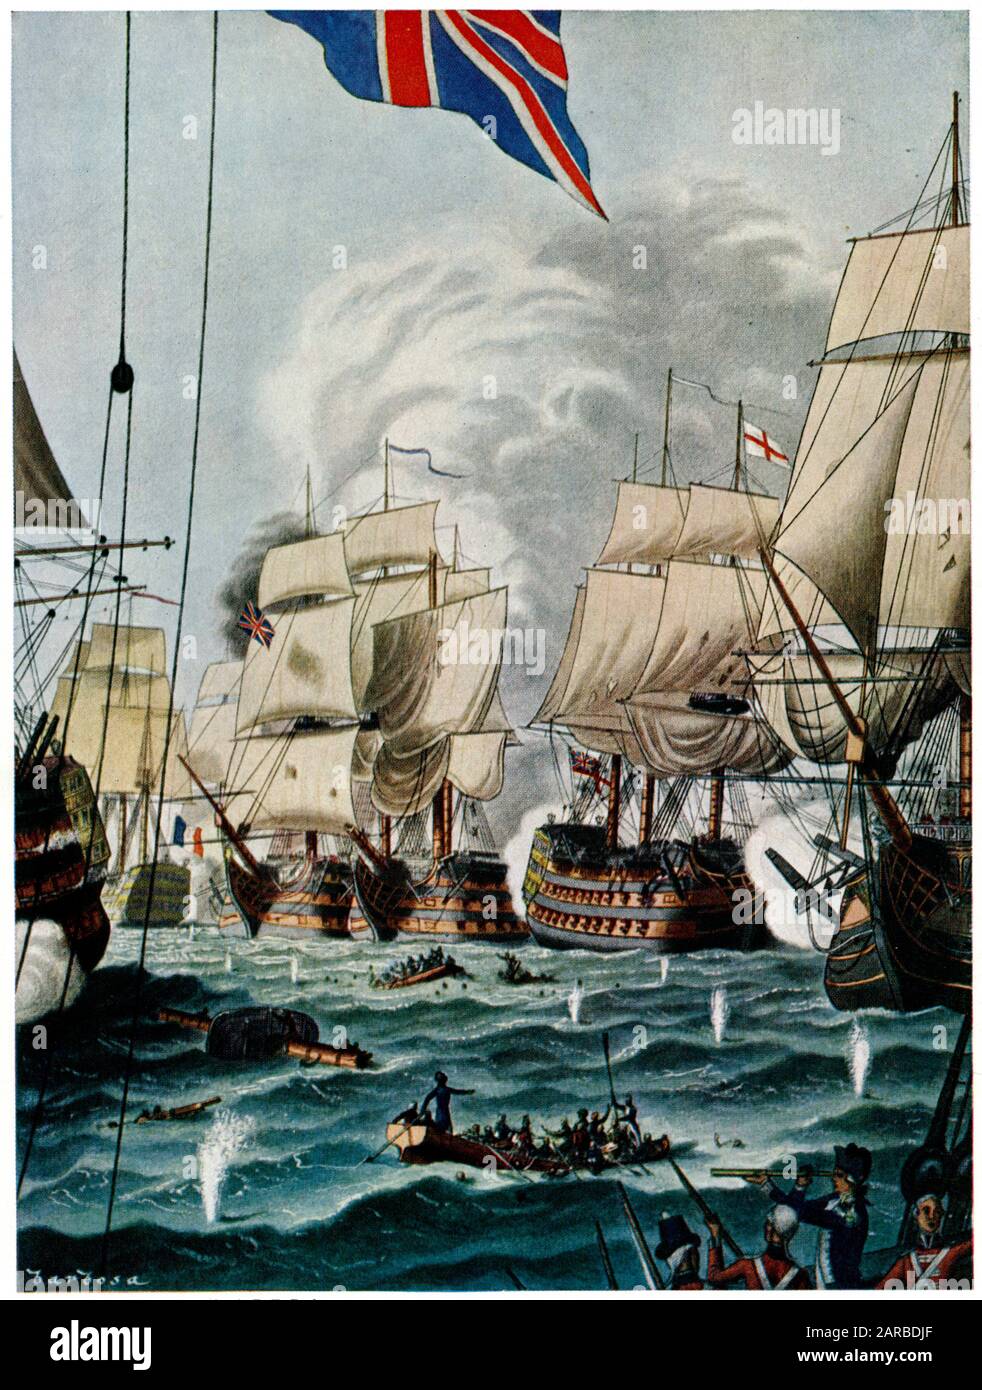 Scene from the Battle of Trafalgar (21 October 1805), Cape Trafalgar, Spain, fought by the British Royal Navy against the combined fleets of the French and Spanish Navies.      Date: 1805 Stock Photo